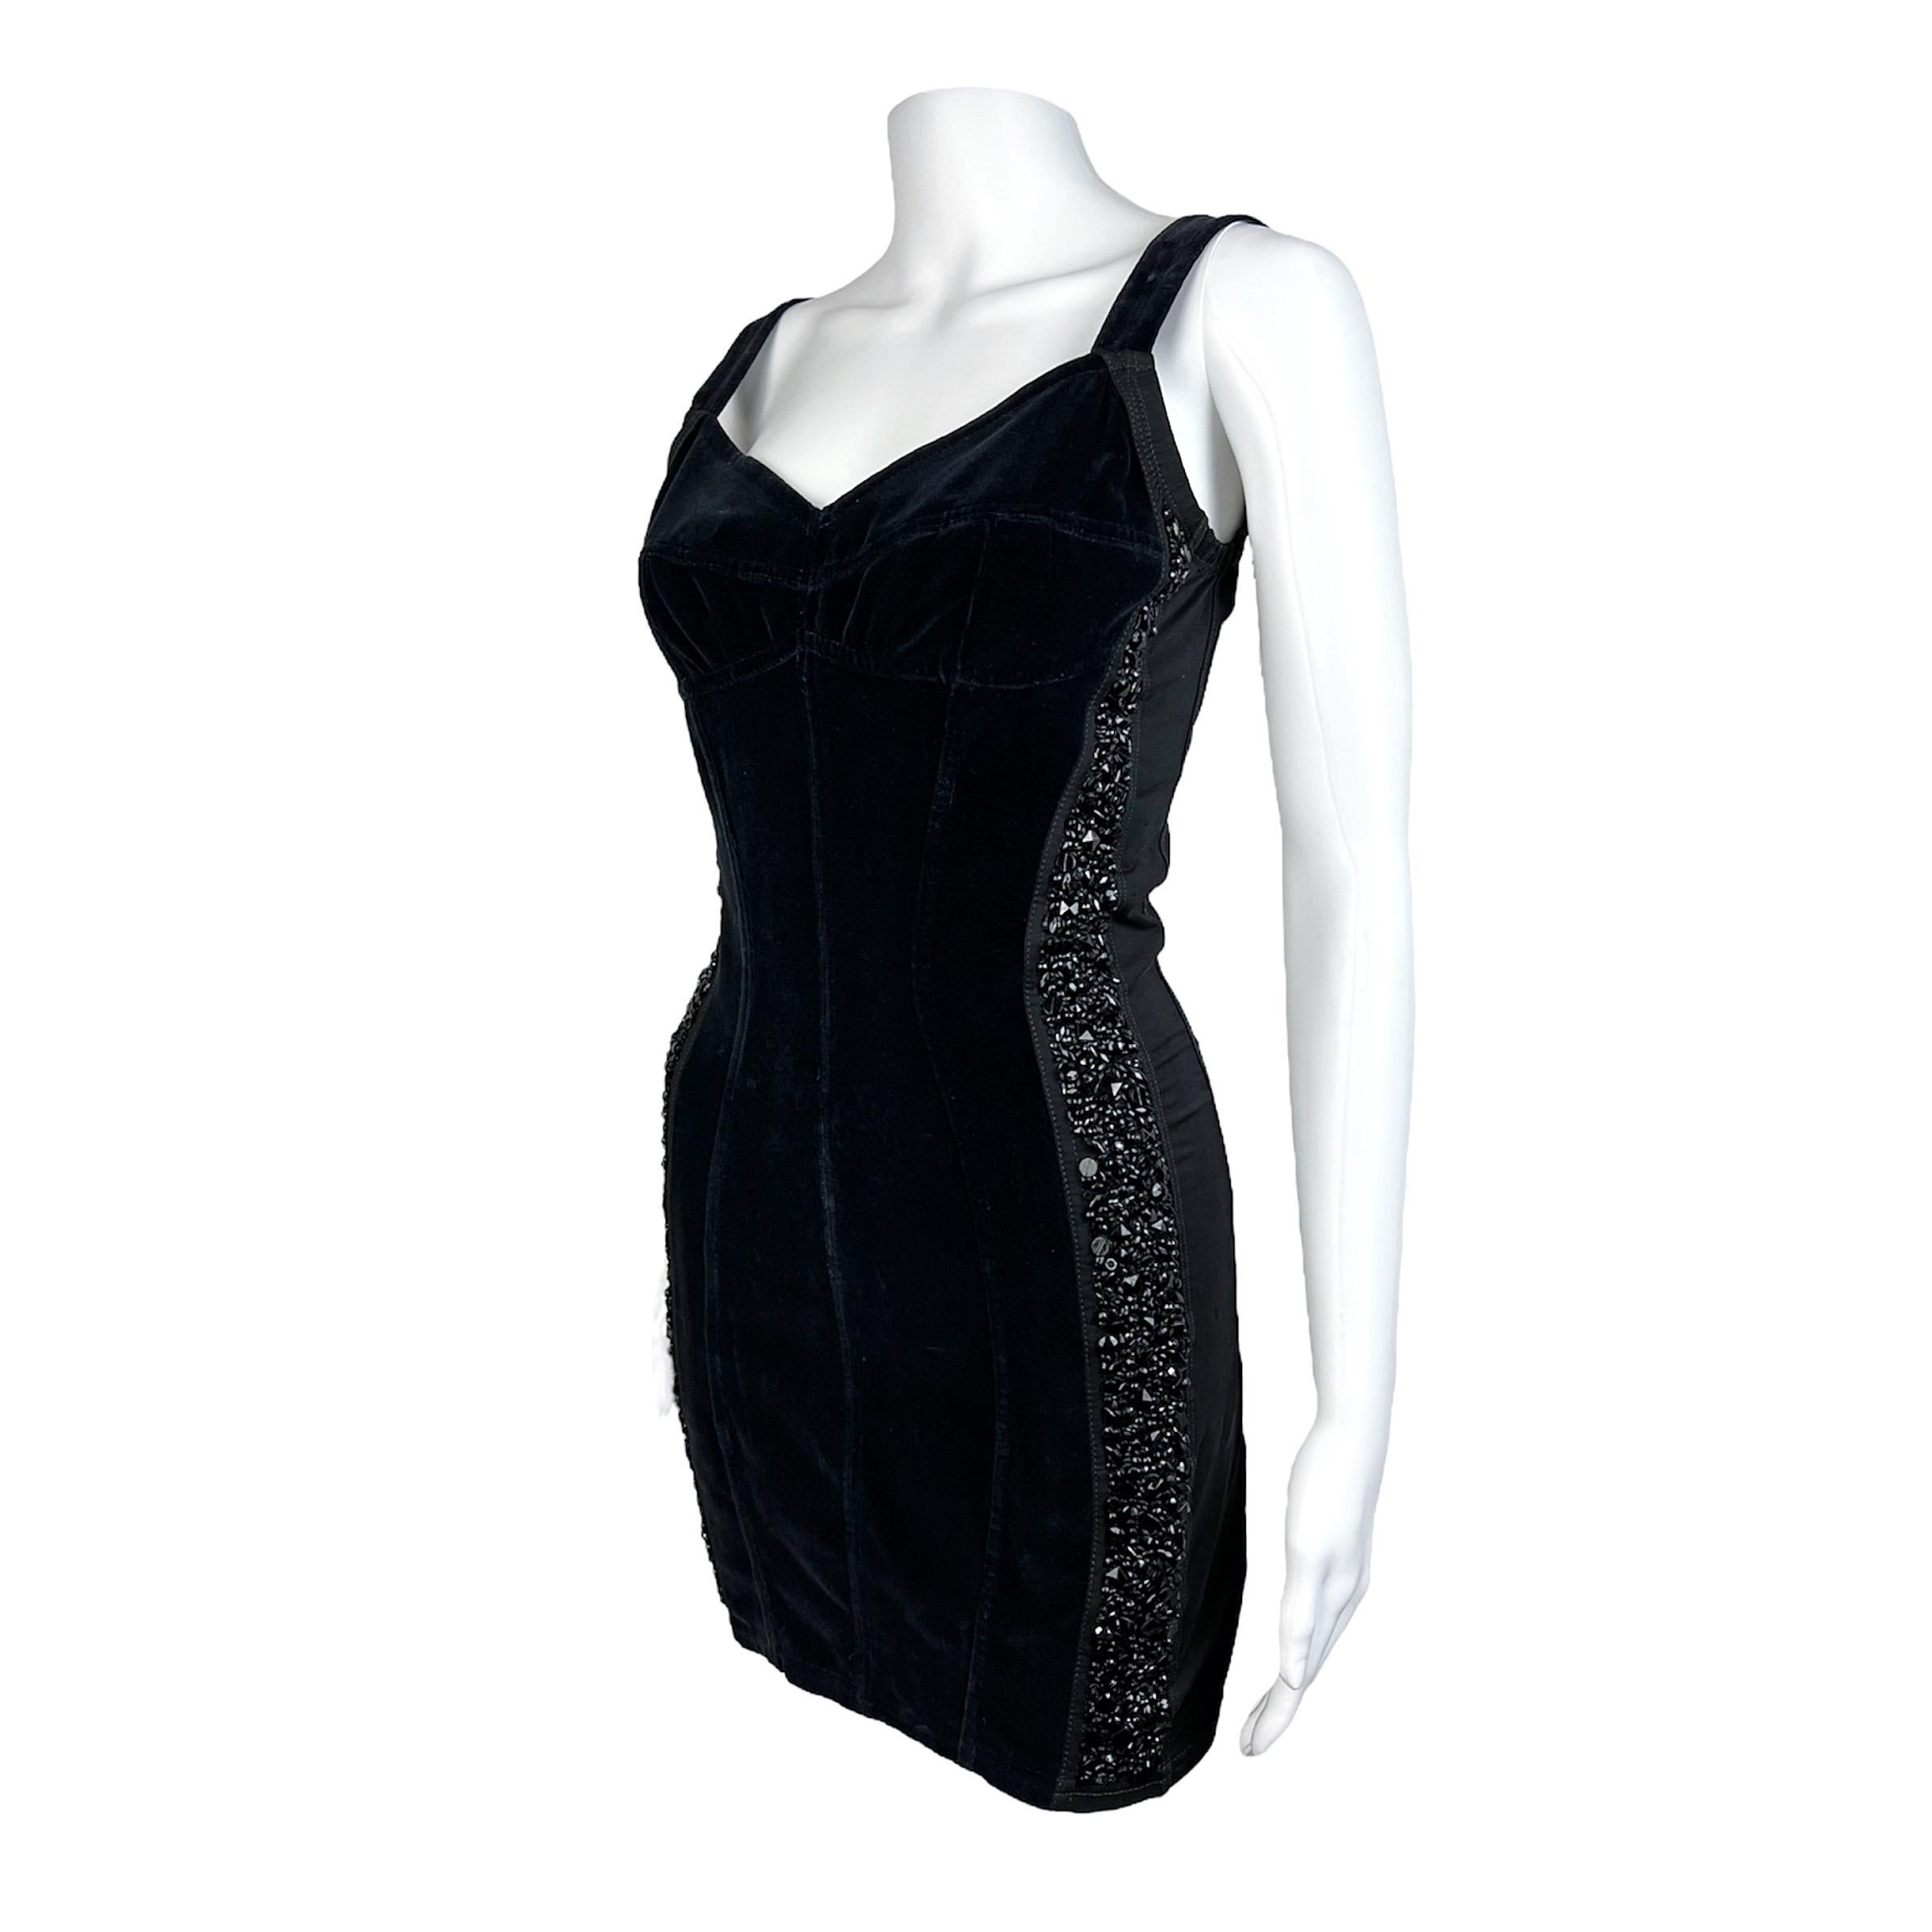 Super cute Dolce & Gabbana black mini dress from the early 90s with crystal panels on each sides. The dress is made out of a beautiful velvet and stretchy panels. The shape is body con and is directly inspired from 1940s lingerie and shape wear